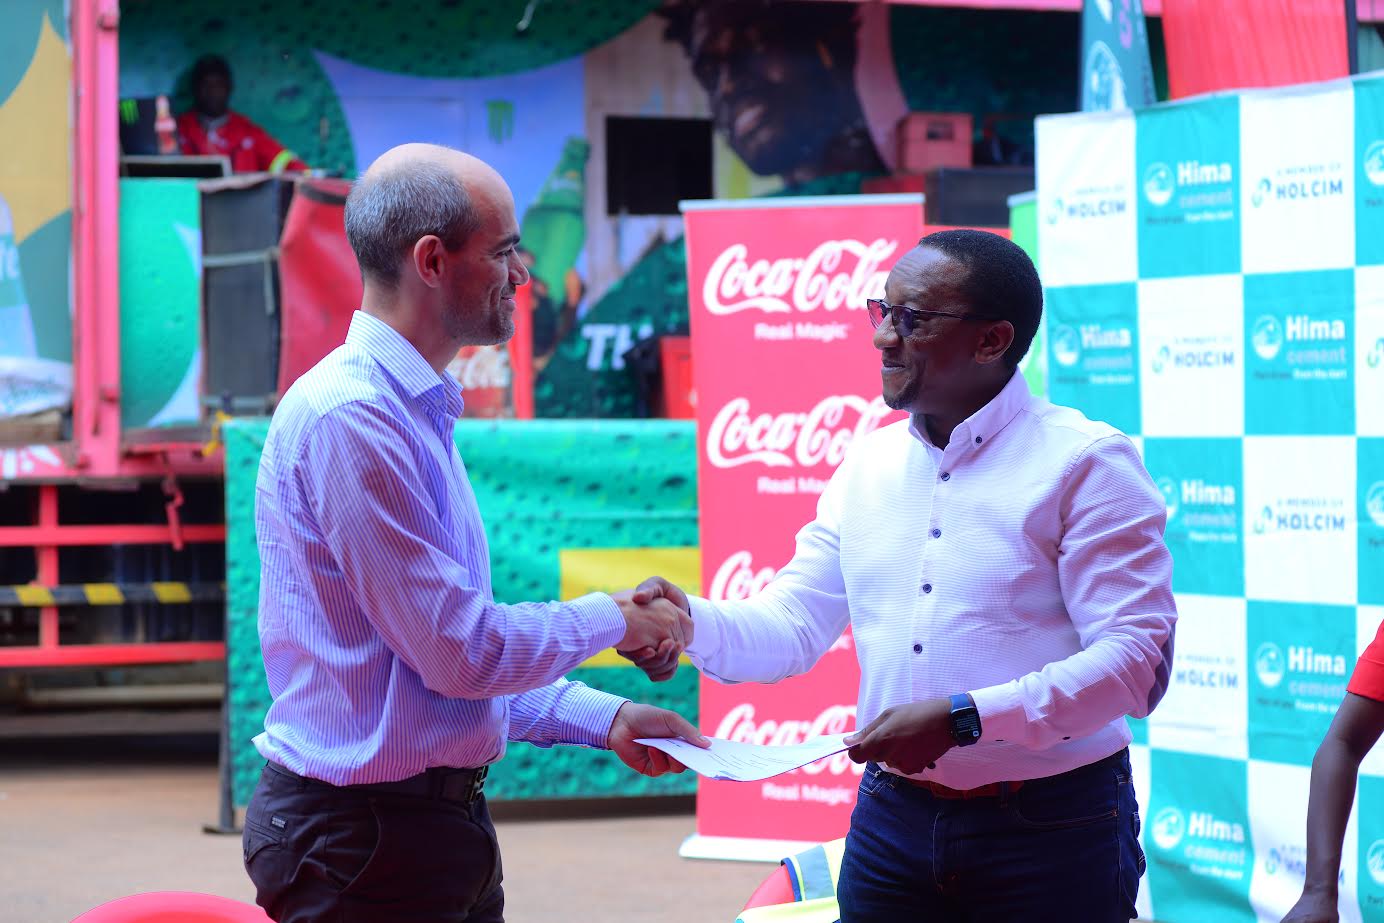 Coca Cola enter partnership with Hima Cement to fuel plastic waste solution